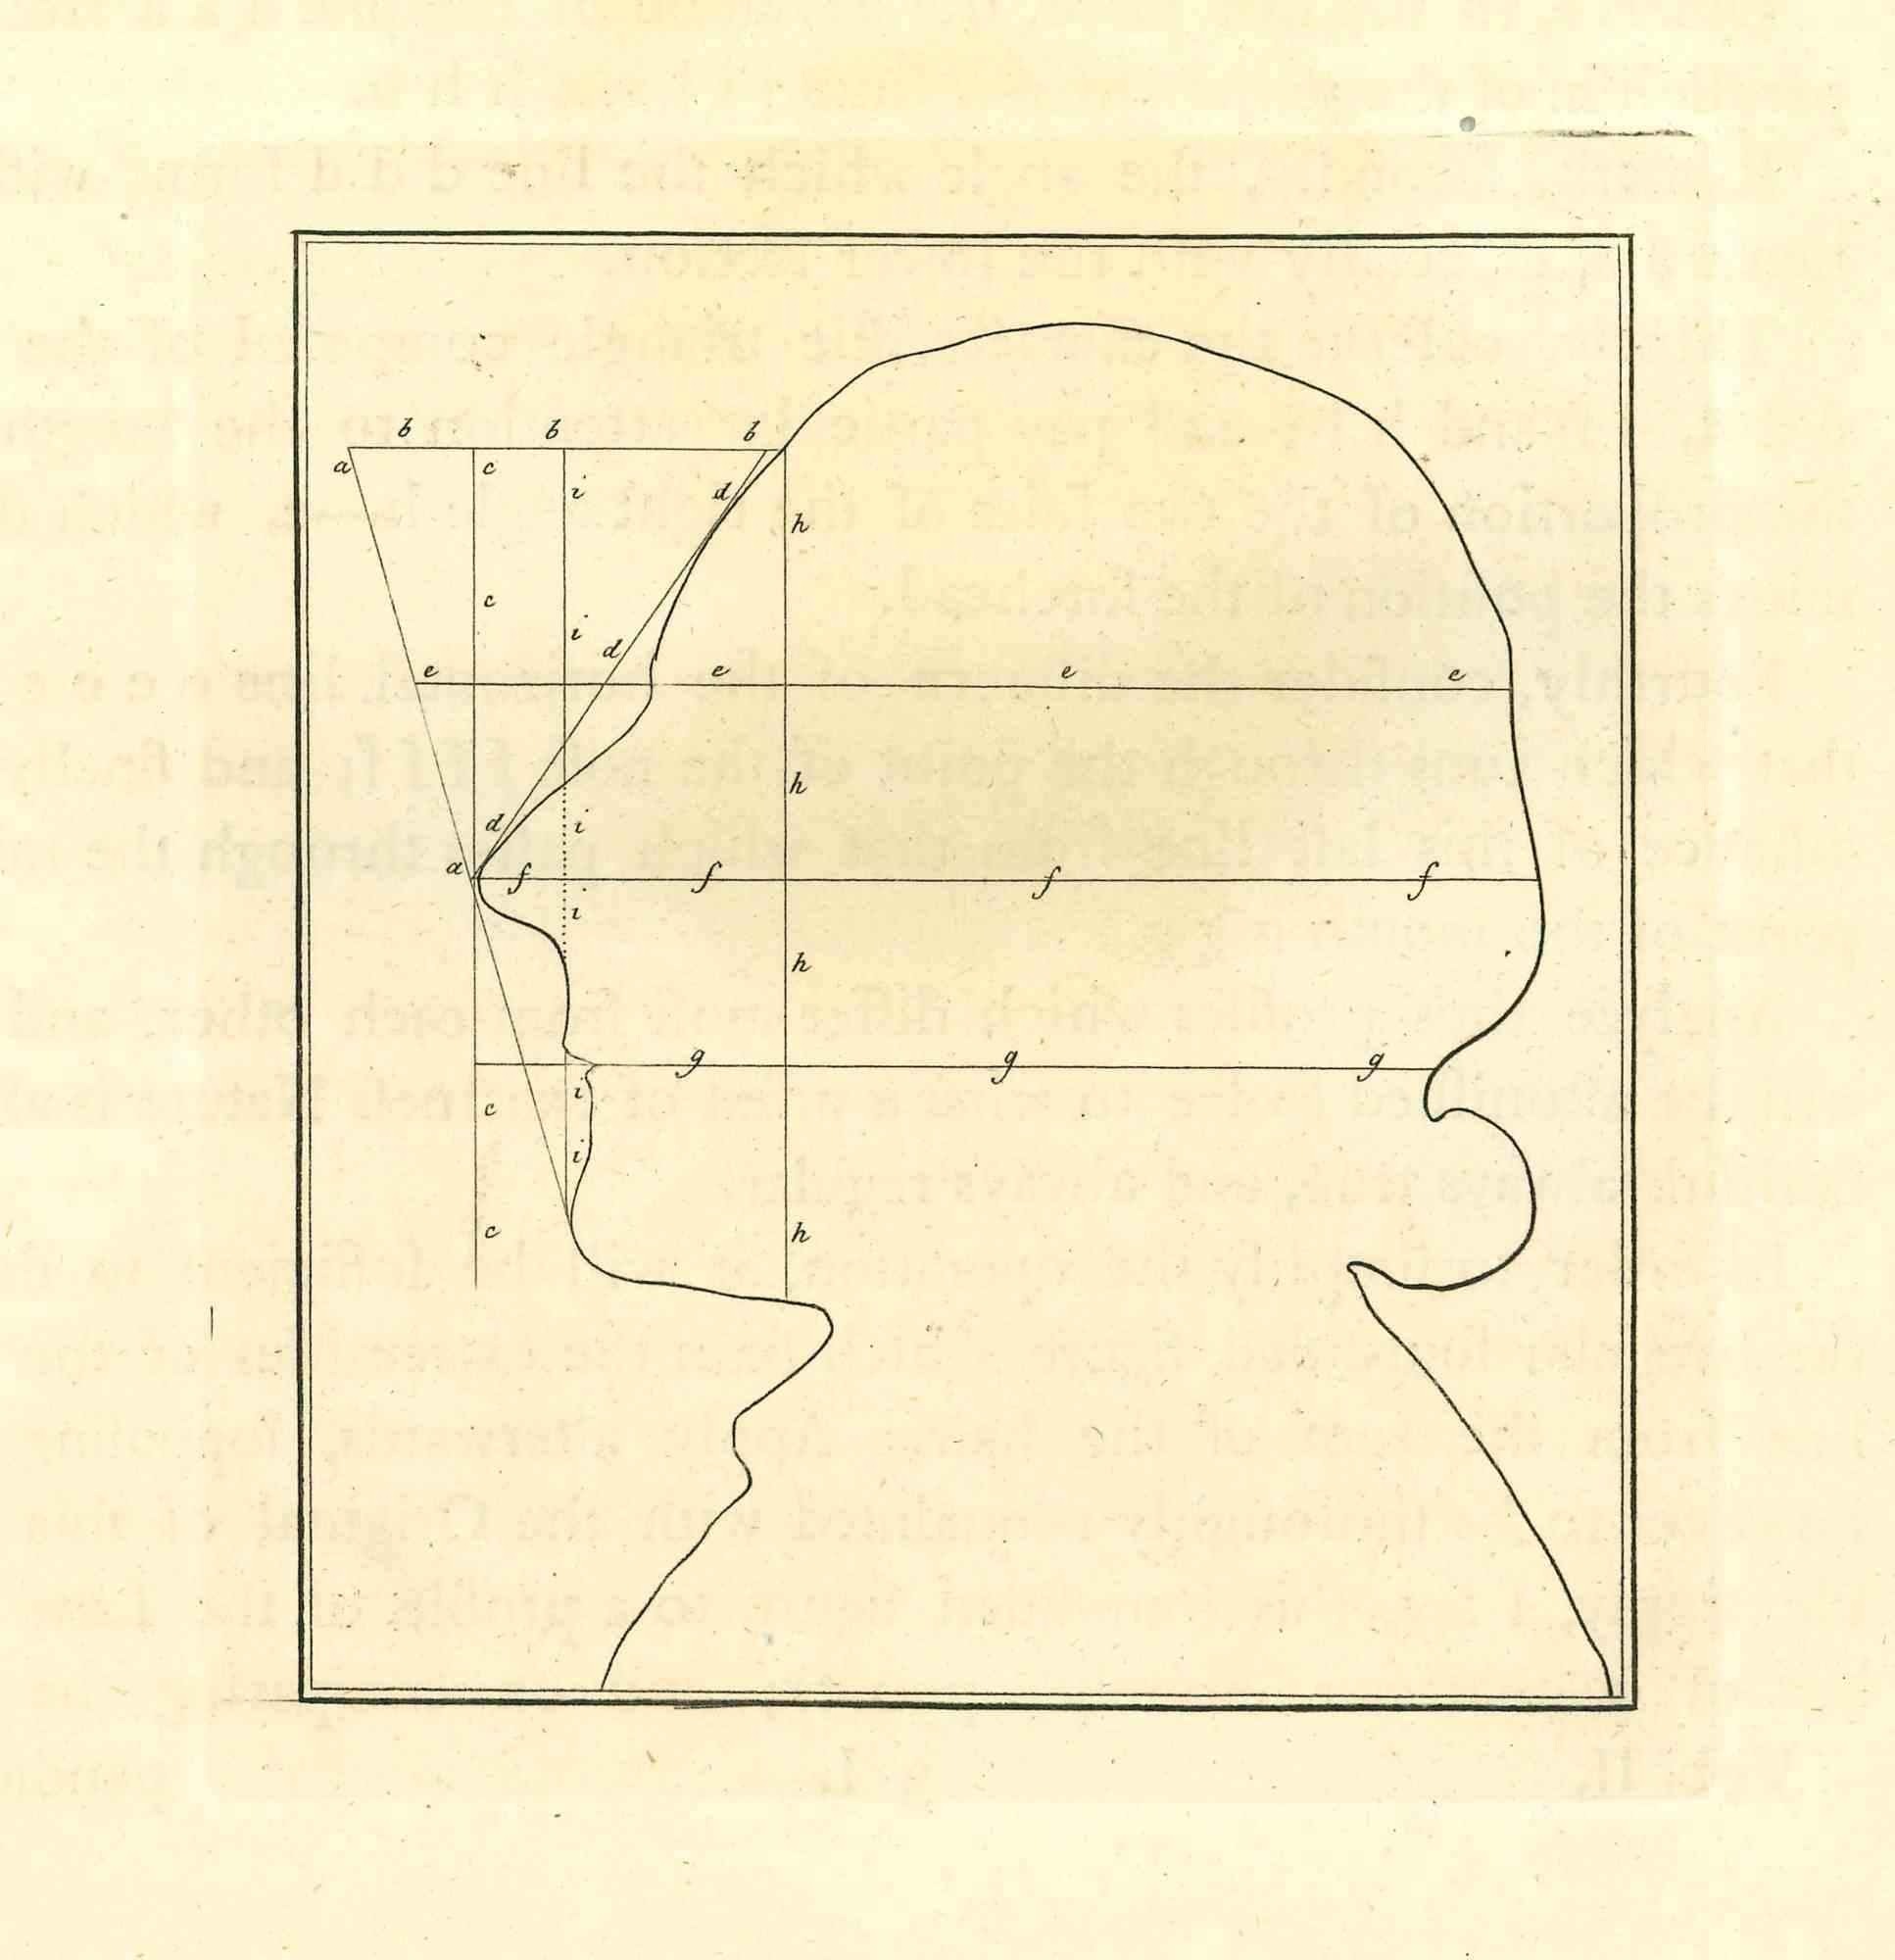 Measuring a Profile is an original etching artwork realized by Thomas Holloway for Johann Caspar Lavater's "Essays on Physiognomy, Designed to Promote the Knowledge and the Love of Mankind", London, Bensley, 1810. 

With the script on the